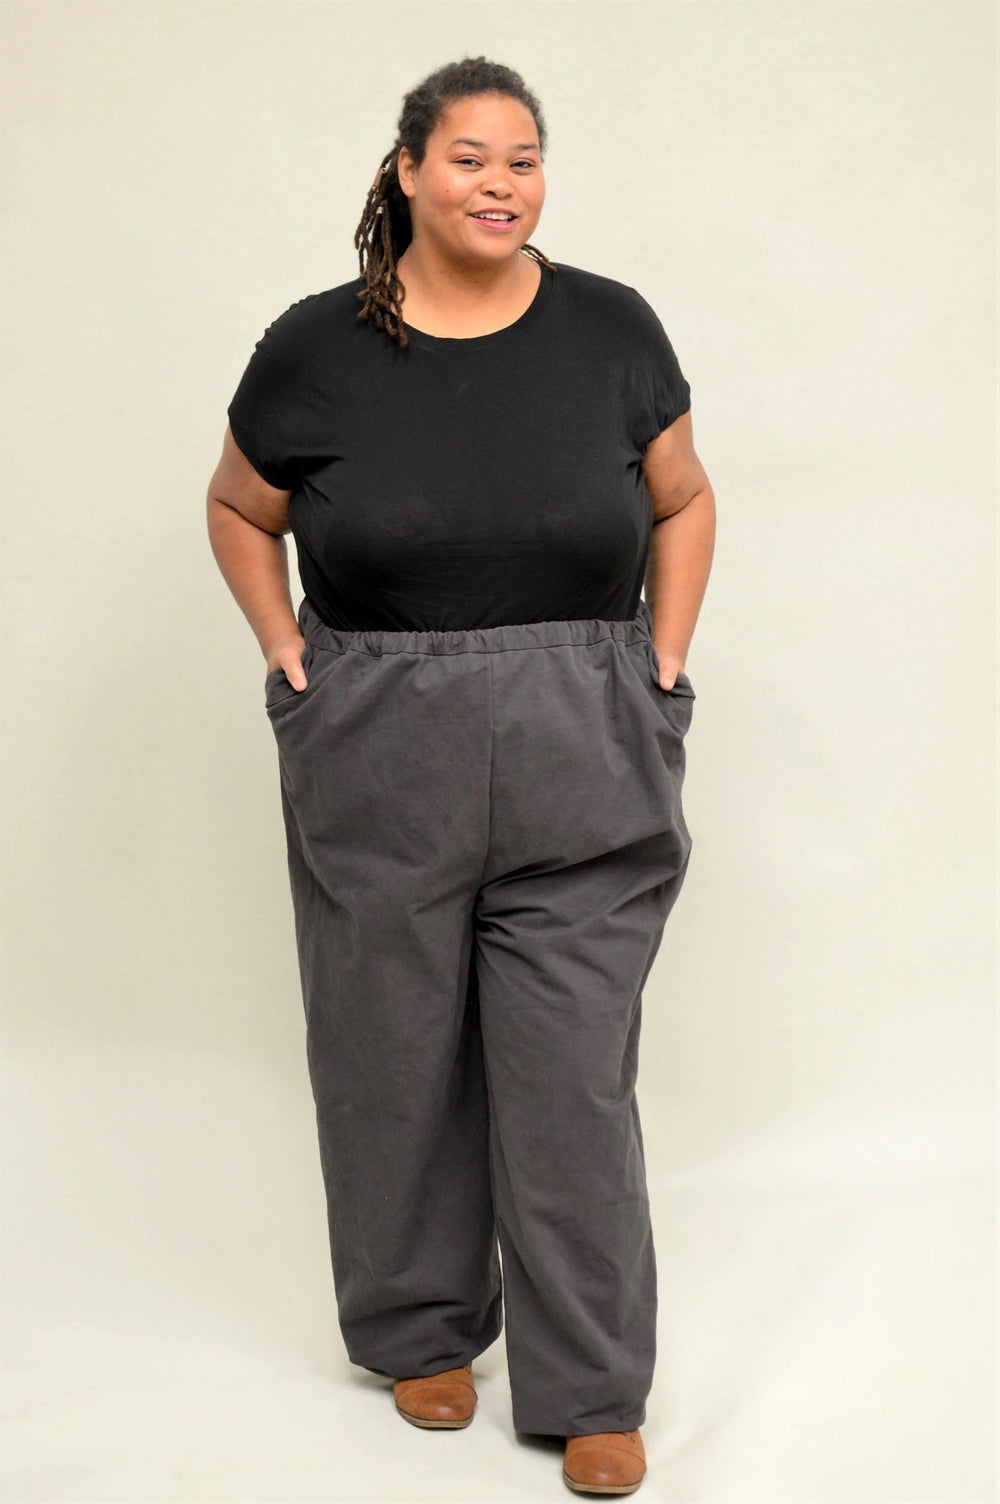 Woman wearing the Basics Pants sewing pattern from Folkwear on The Fold Line. A trouser pattern made in linen, flannel, gabardine, twill or lightweight denim fabrics, featuring an elastic-waist, relaxed fit, high-rise waist and front pockets with pocket f